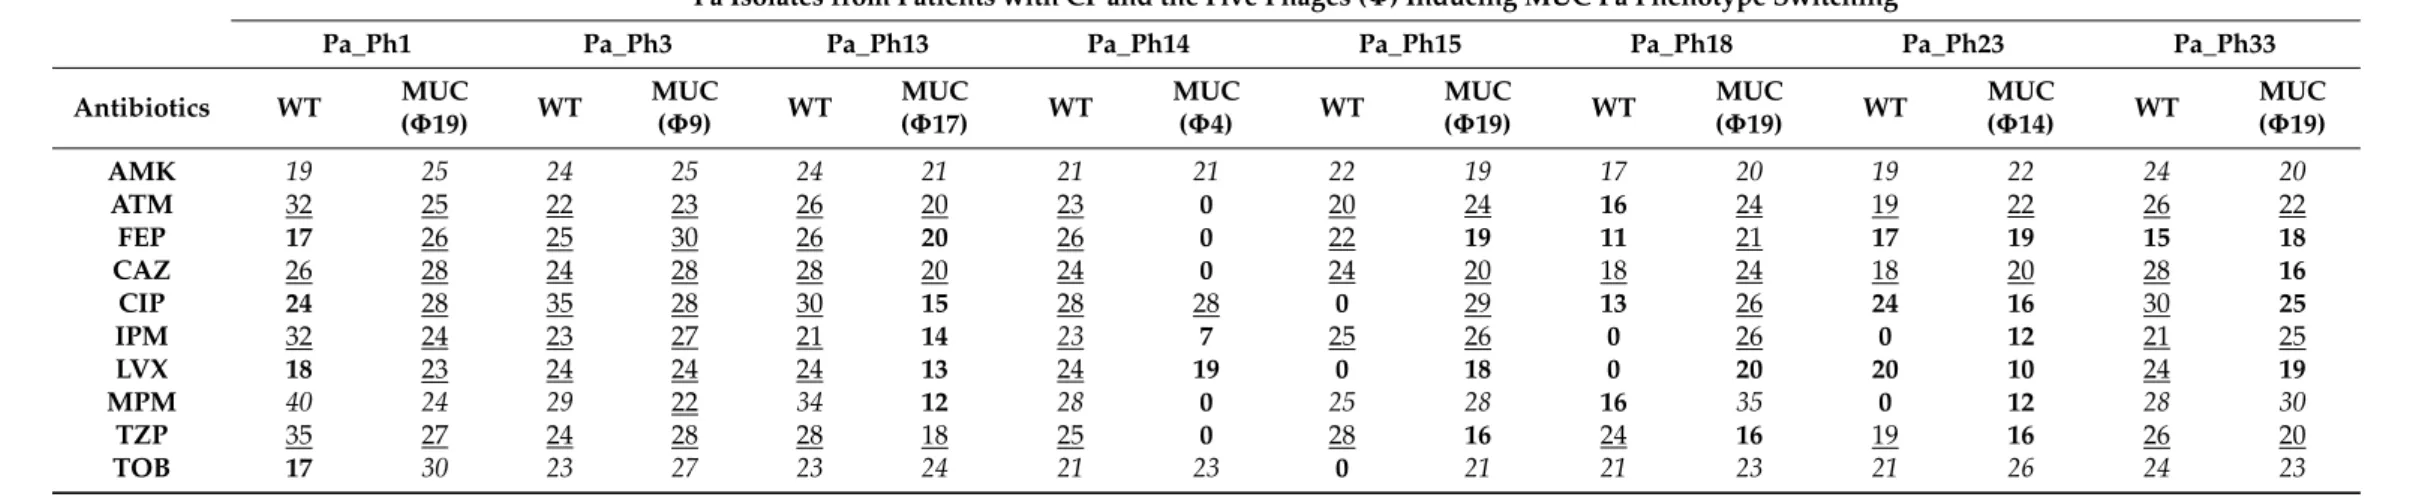 Table 3. In vitro antibiotic activity comparing ancestral cystic fibrosis (CF) Pseudomonas aeruginosa (Pa) isolates (wild type, WT), and their switched mucoid (MUC) Pa phenotypes induced by phage exposures.